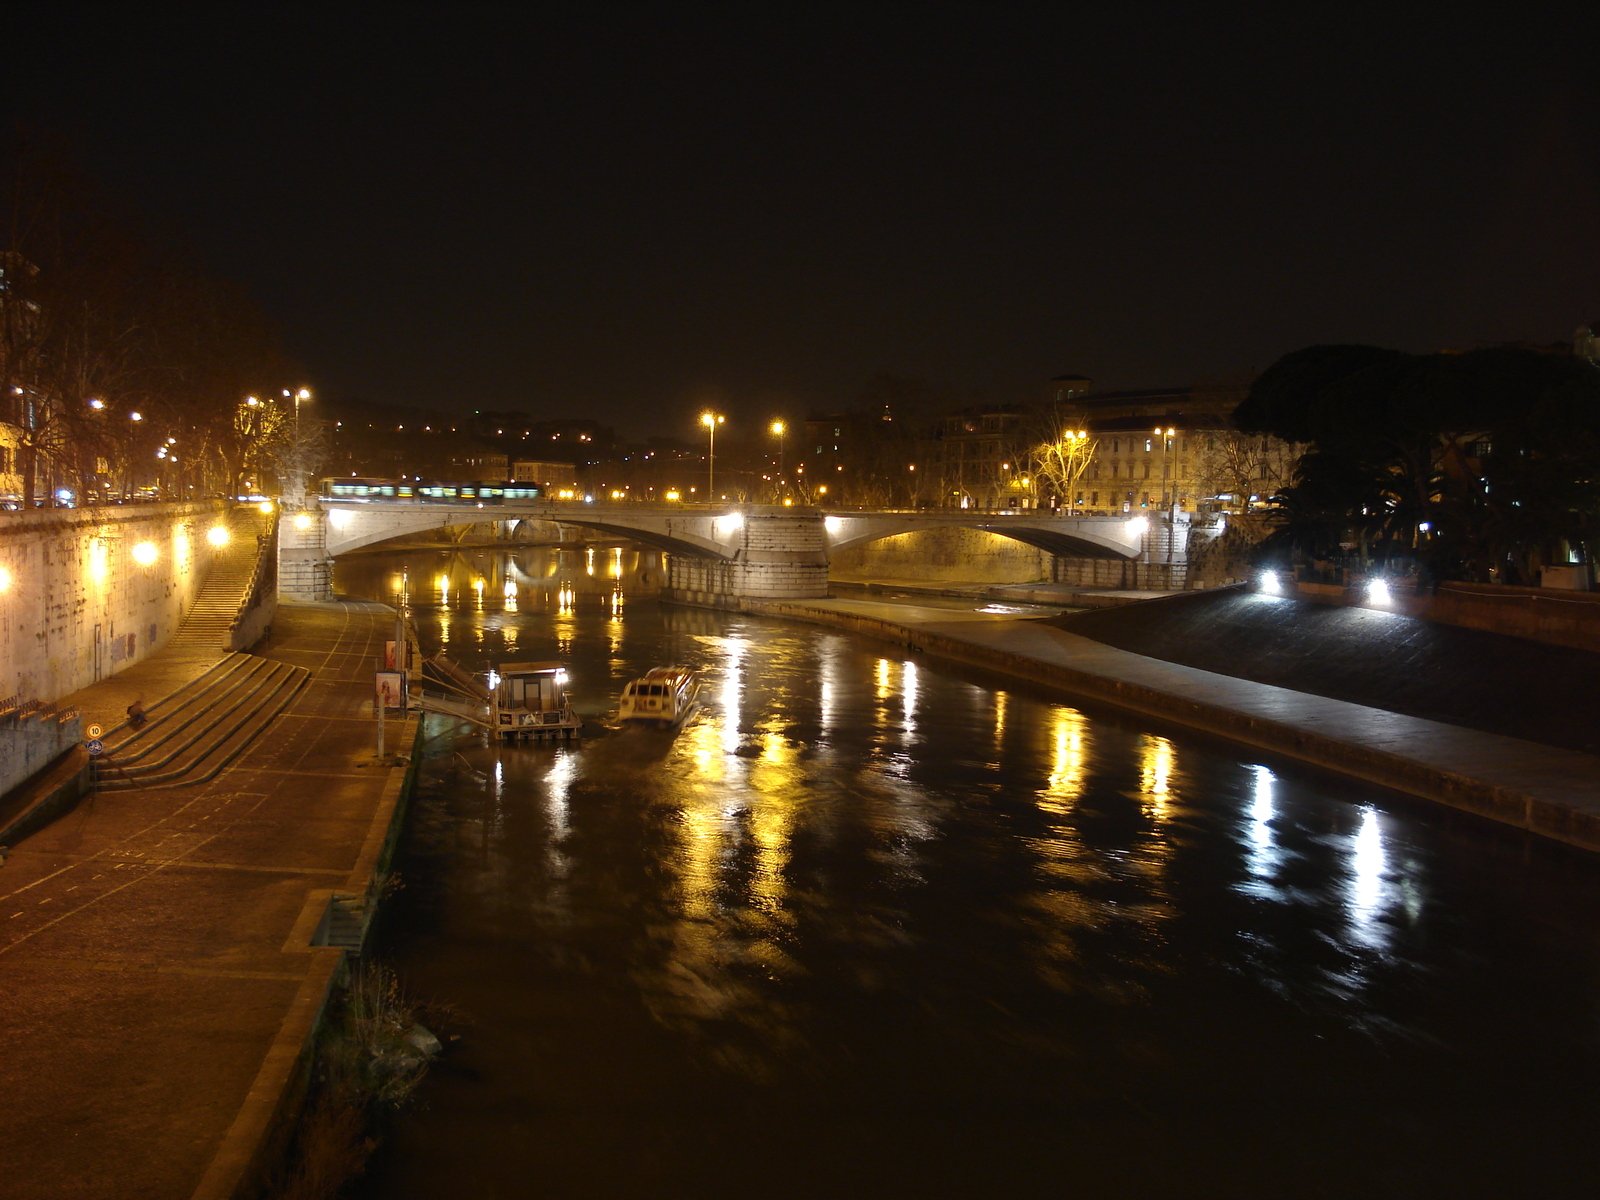 a bridge over water with lights on at night